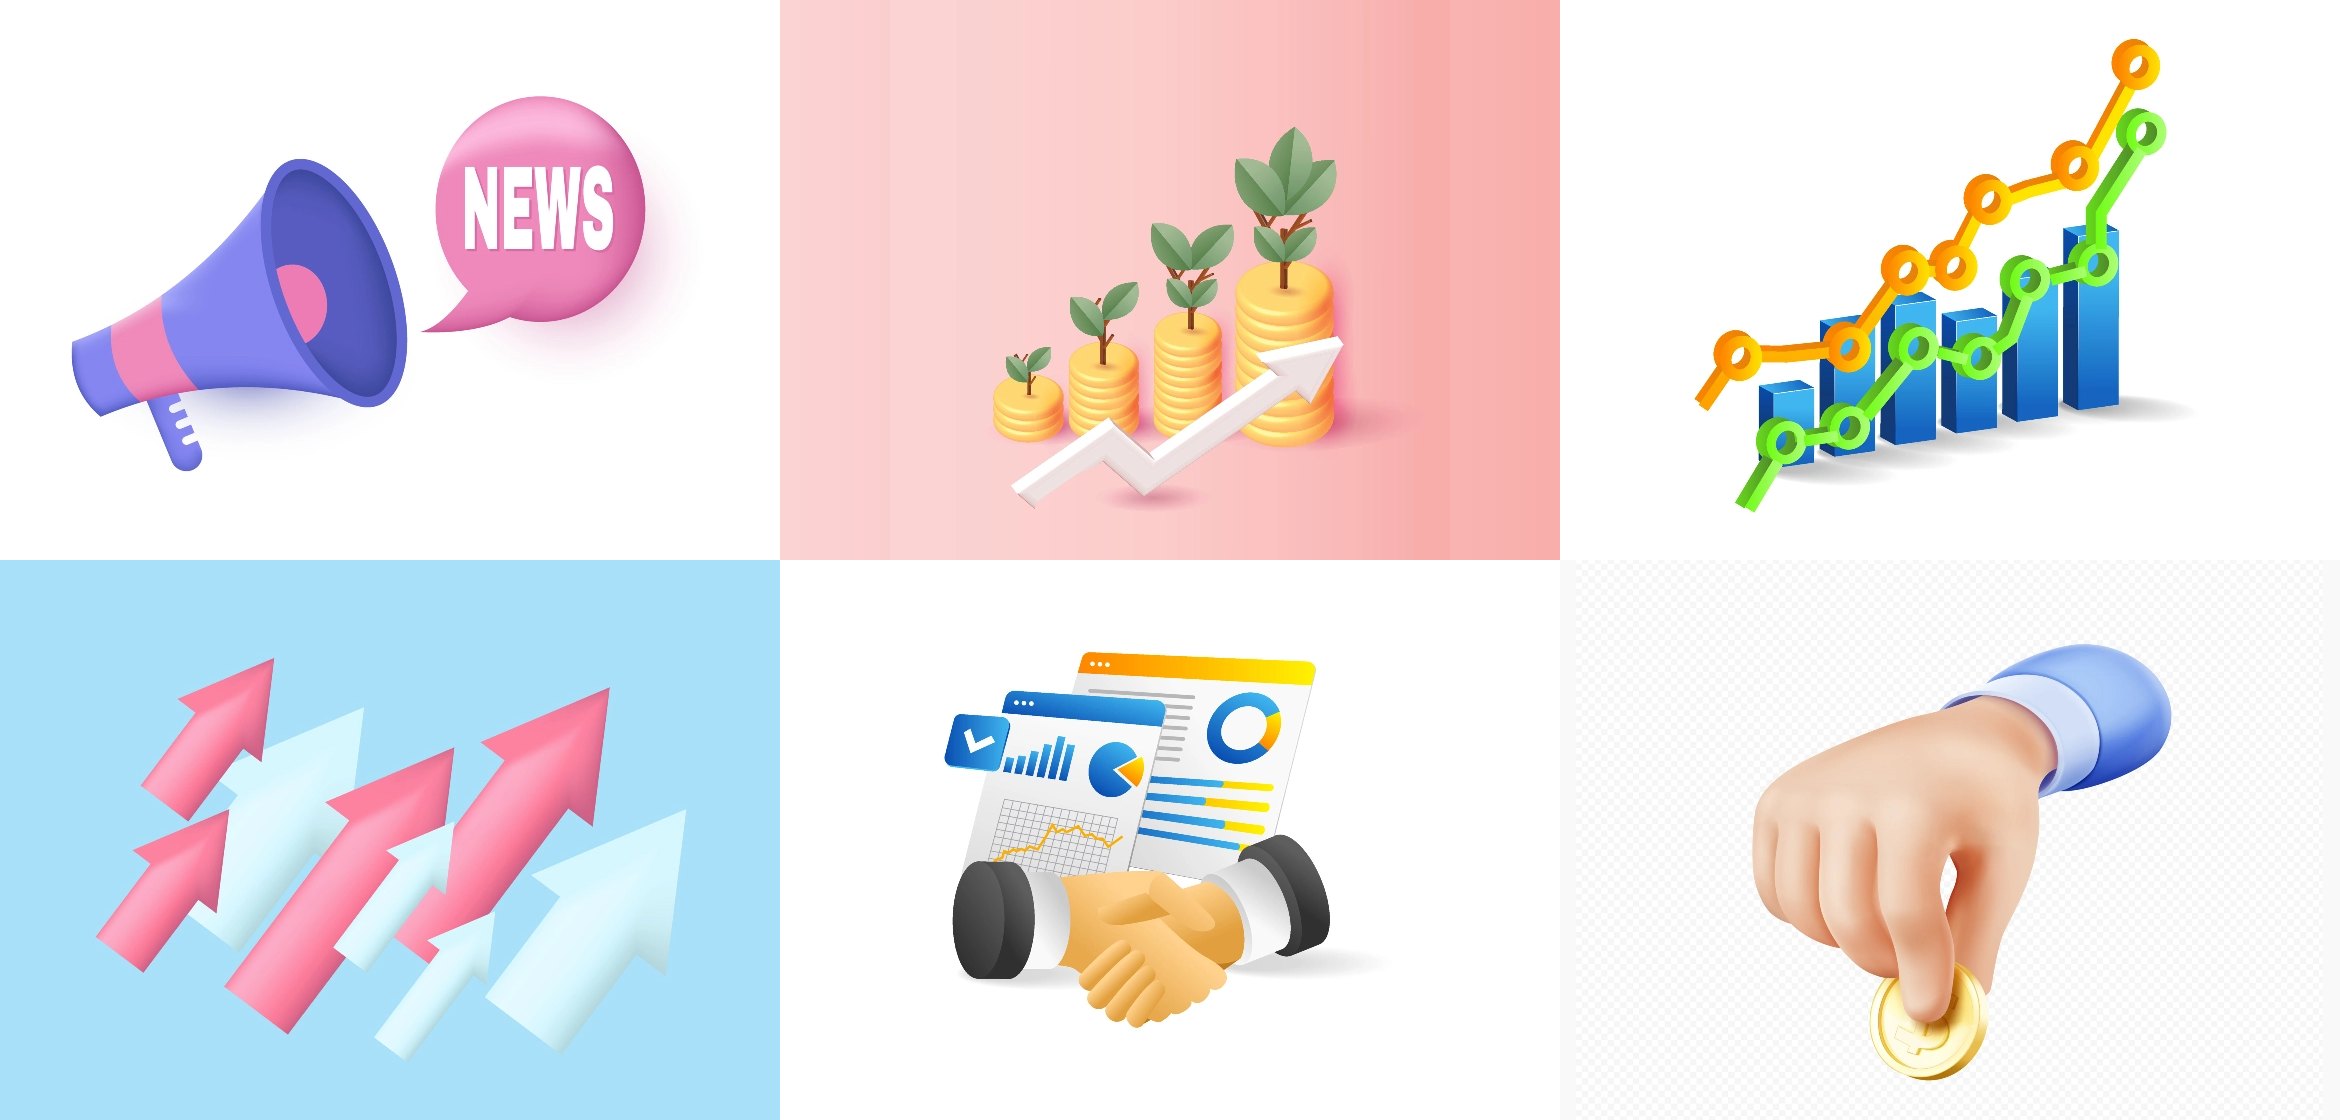 News and Media Application Illustrations and Icons